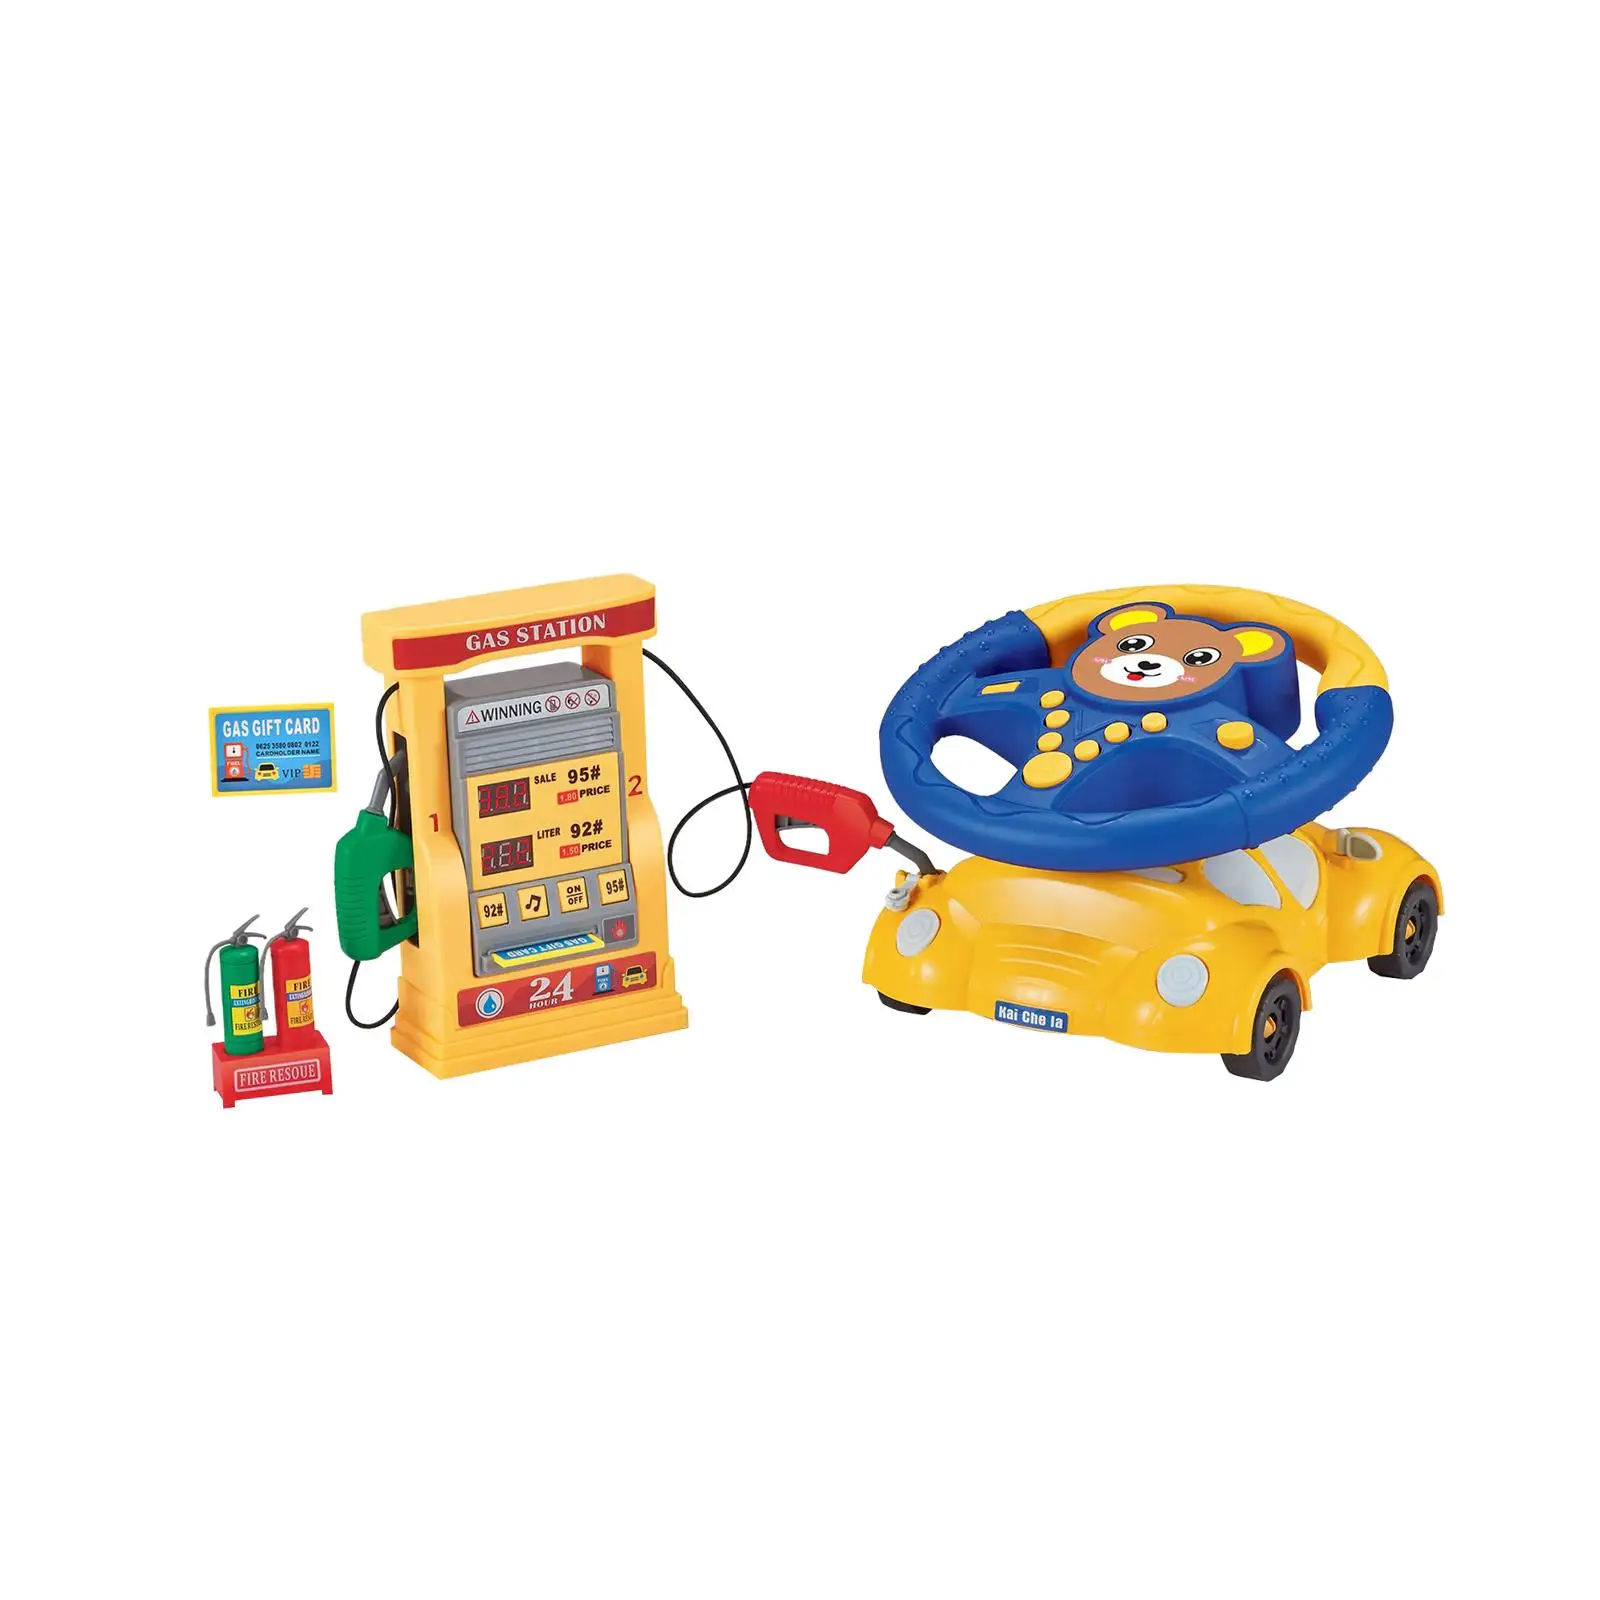 Steering Wheel Toy Pretend Play Sensory Toy Puzzle Game for Kids Children